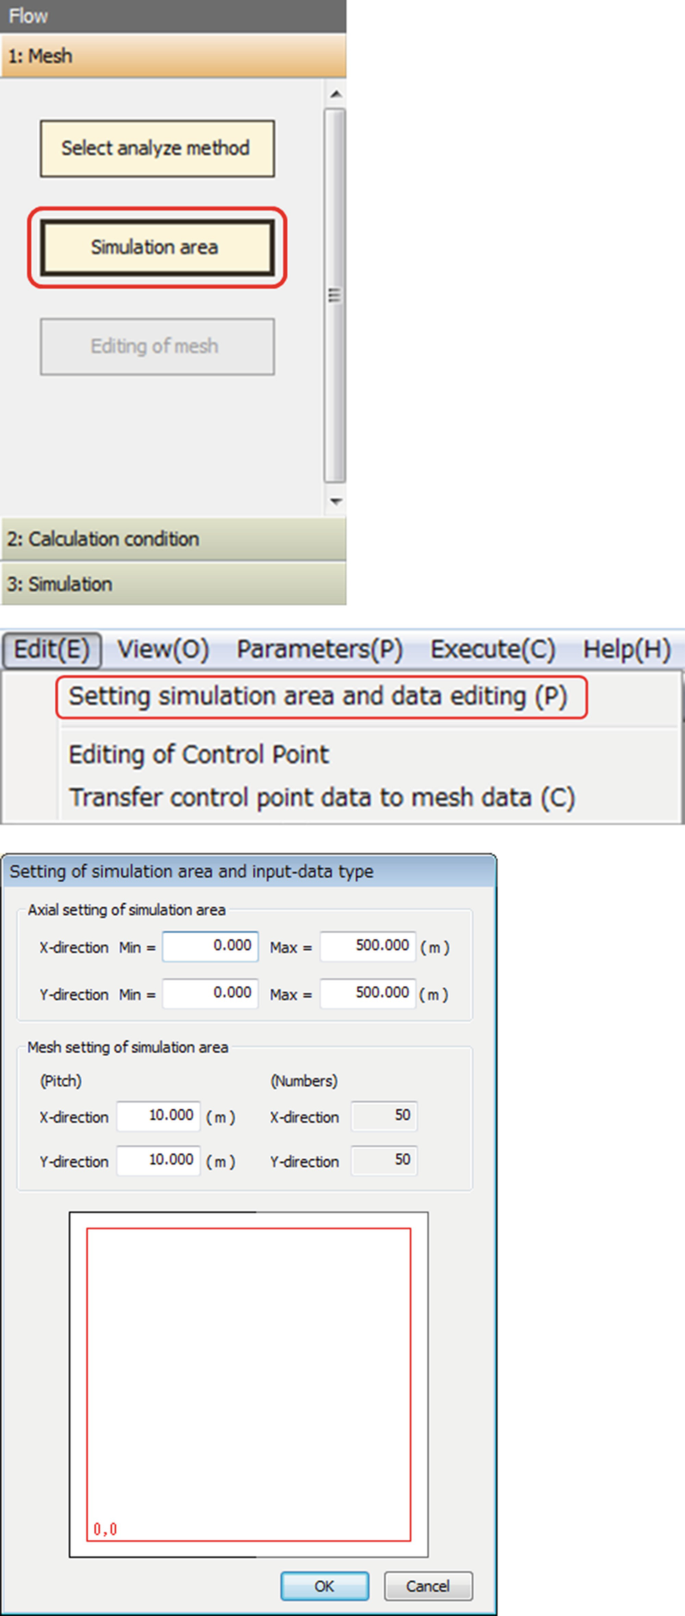 3 screenshots. 1. Under the mesh setting in the flow tab, the simulation area option is selected. 2. Setting simulation area and data editing option is selected from the edit tab. 3. The setting of the simulation area and input data type tab have fields for axial and mesh settings of the simulation area.